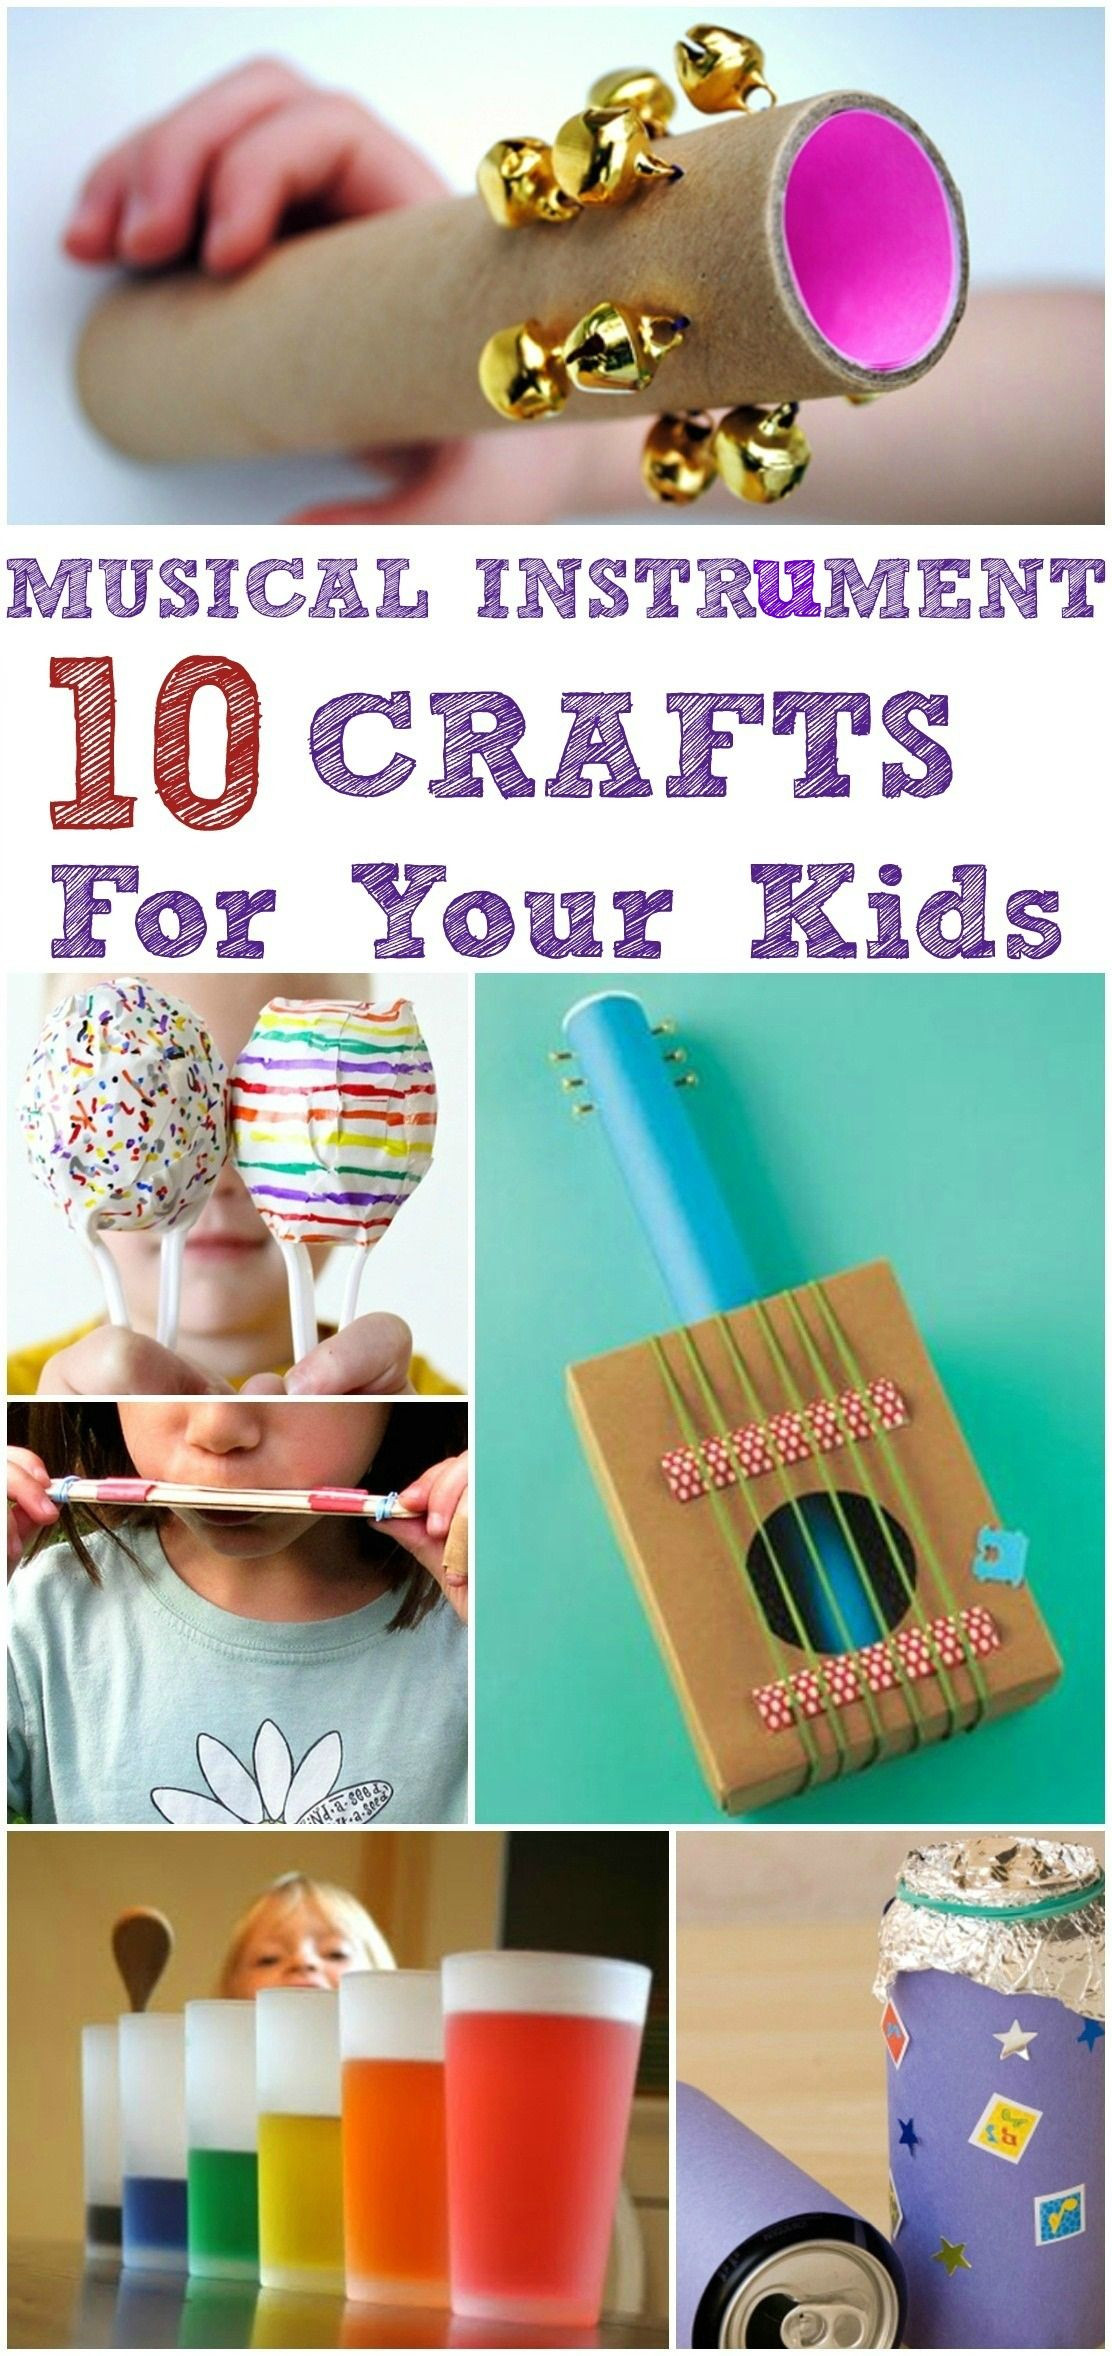 DIY Music Instruments For Kids
 Top 10 Musical Instrument Crafts For Kids